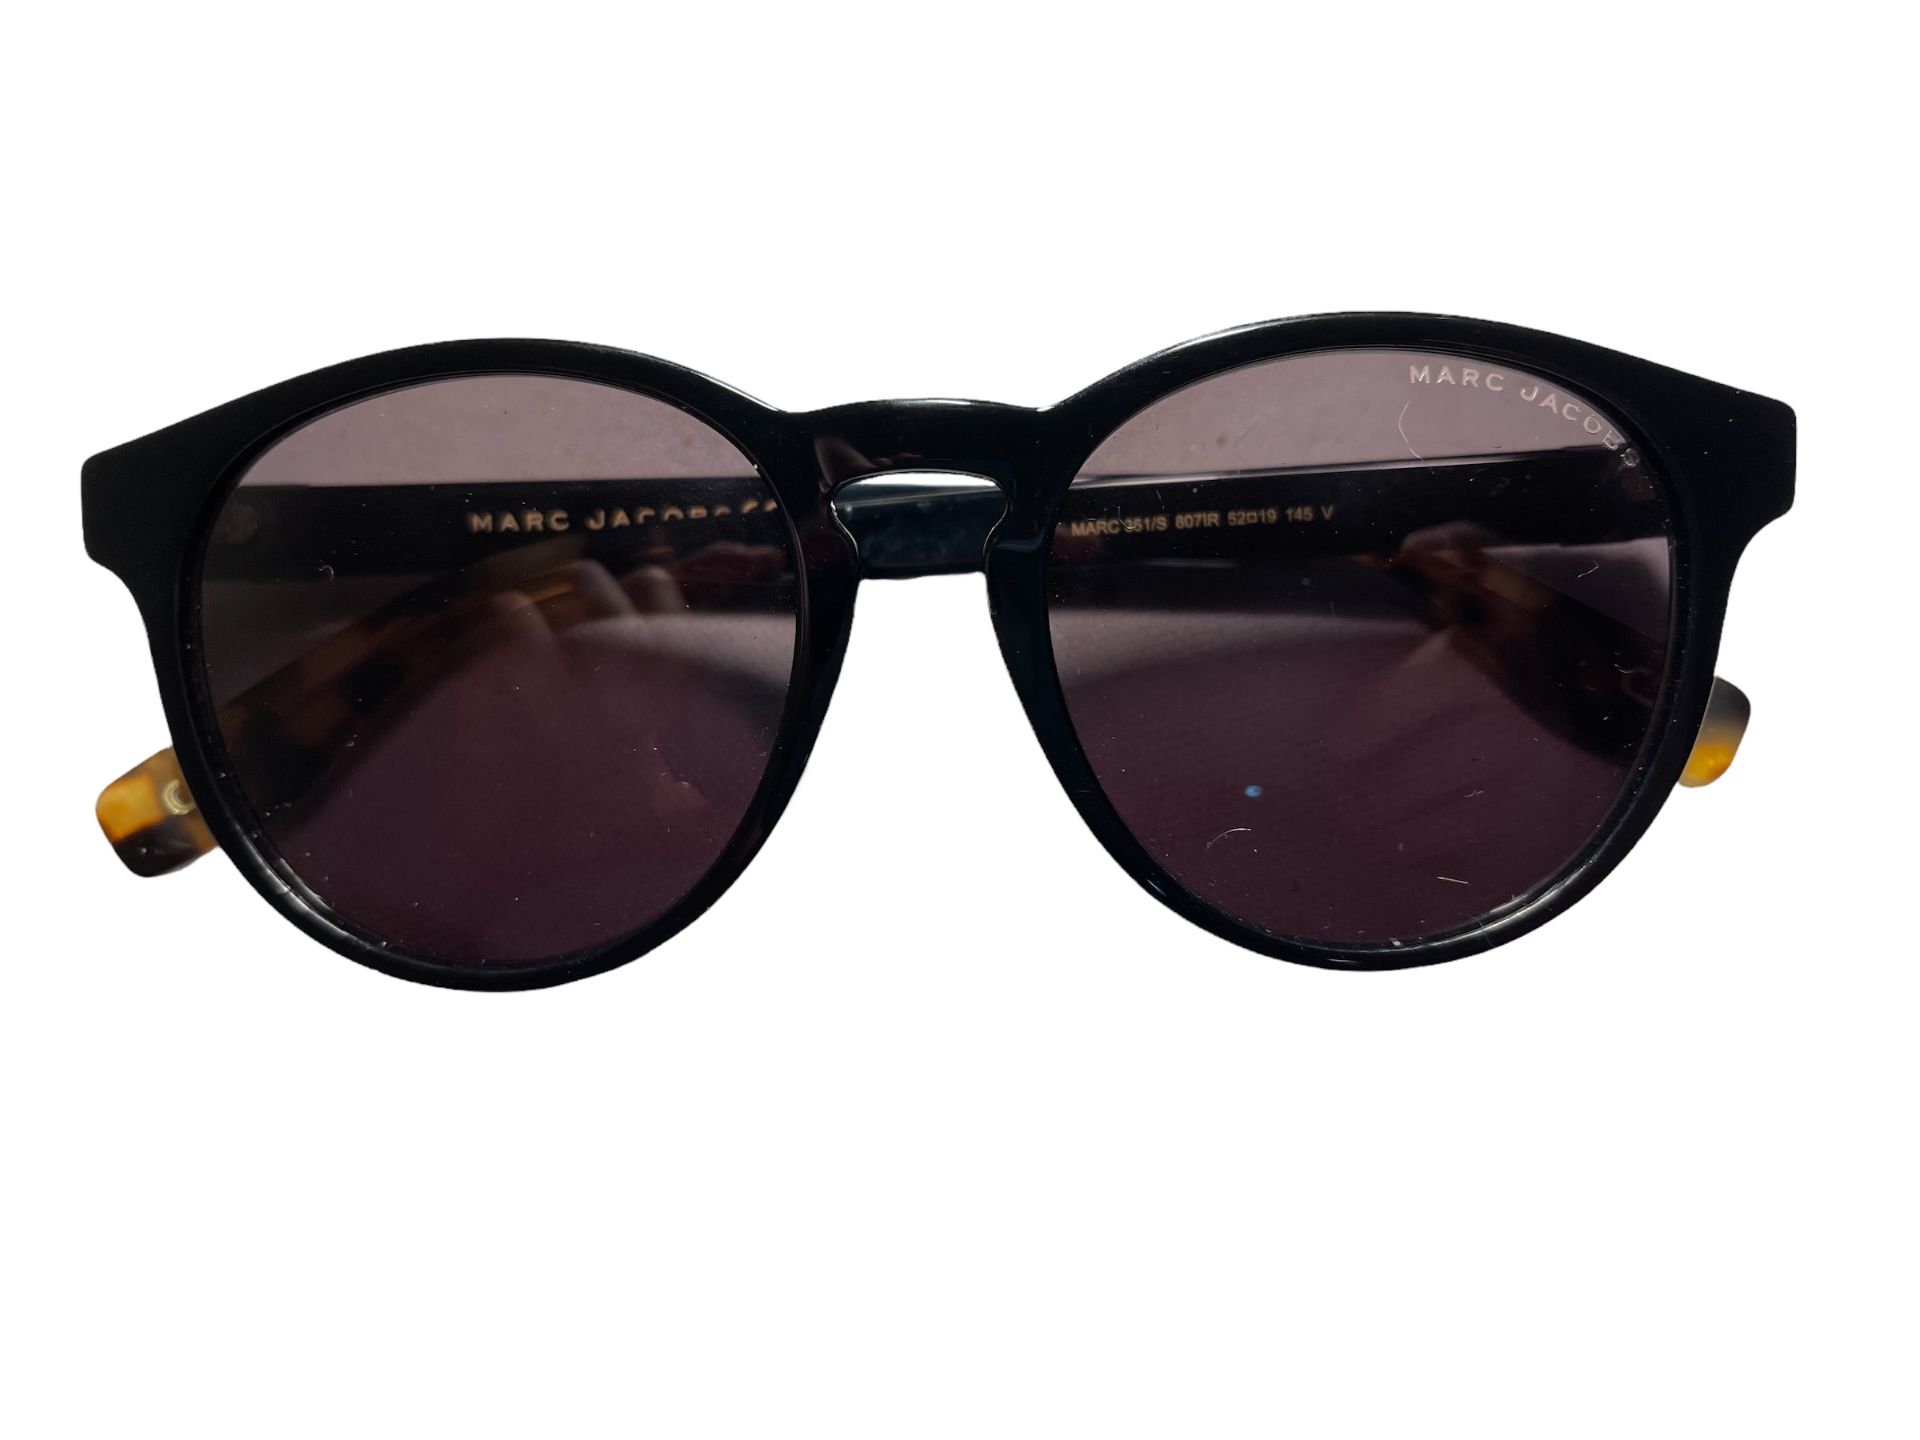 Marc Jacobs Ladies Sunglasses - Ex Demo or Surplus Stock from our Private Jet Charter